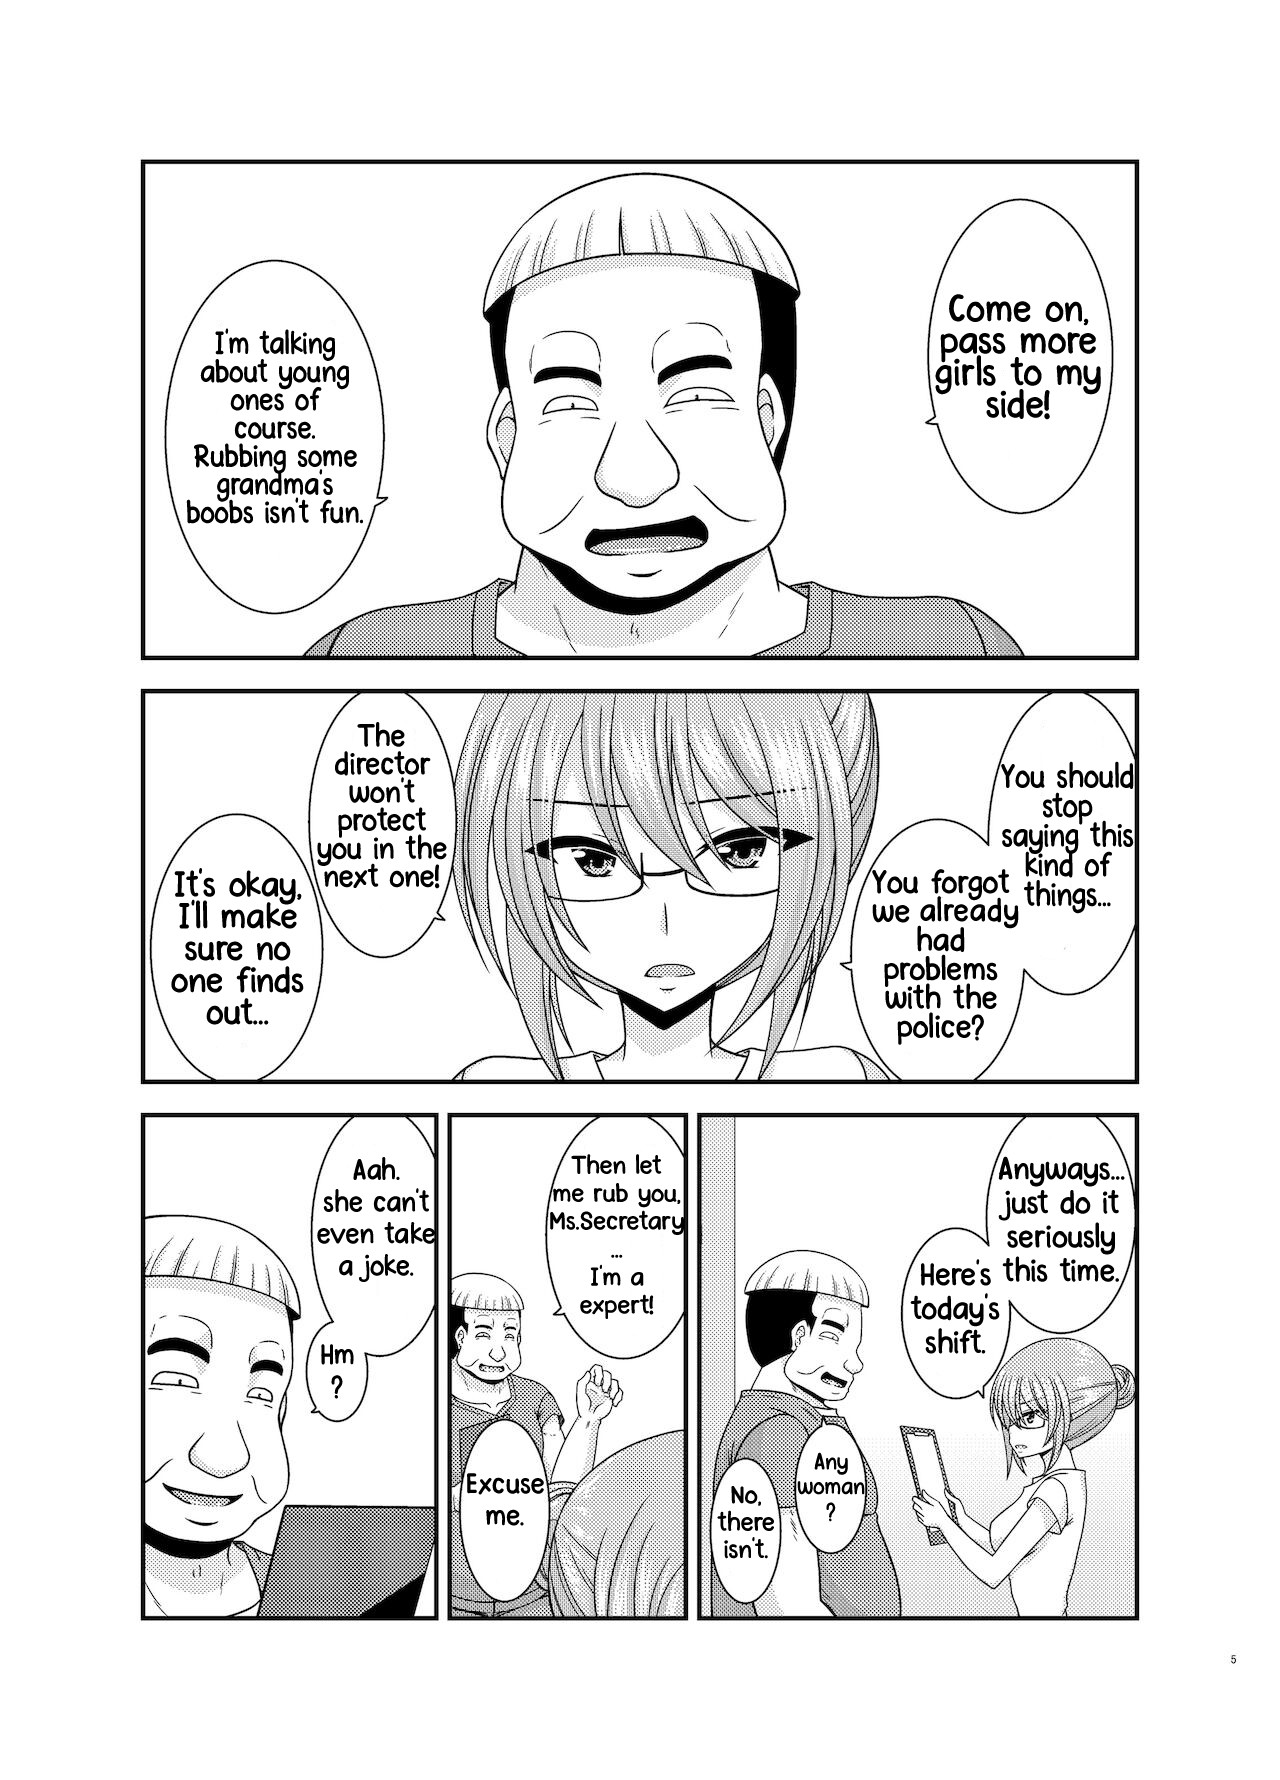 Hentai Manga Comic-The Story of a Vtuber Who Went To a Massage Parlor Only To End Up Getting Fucked After She Was Mistaken For a Boy --Chapter 3-2